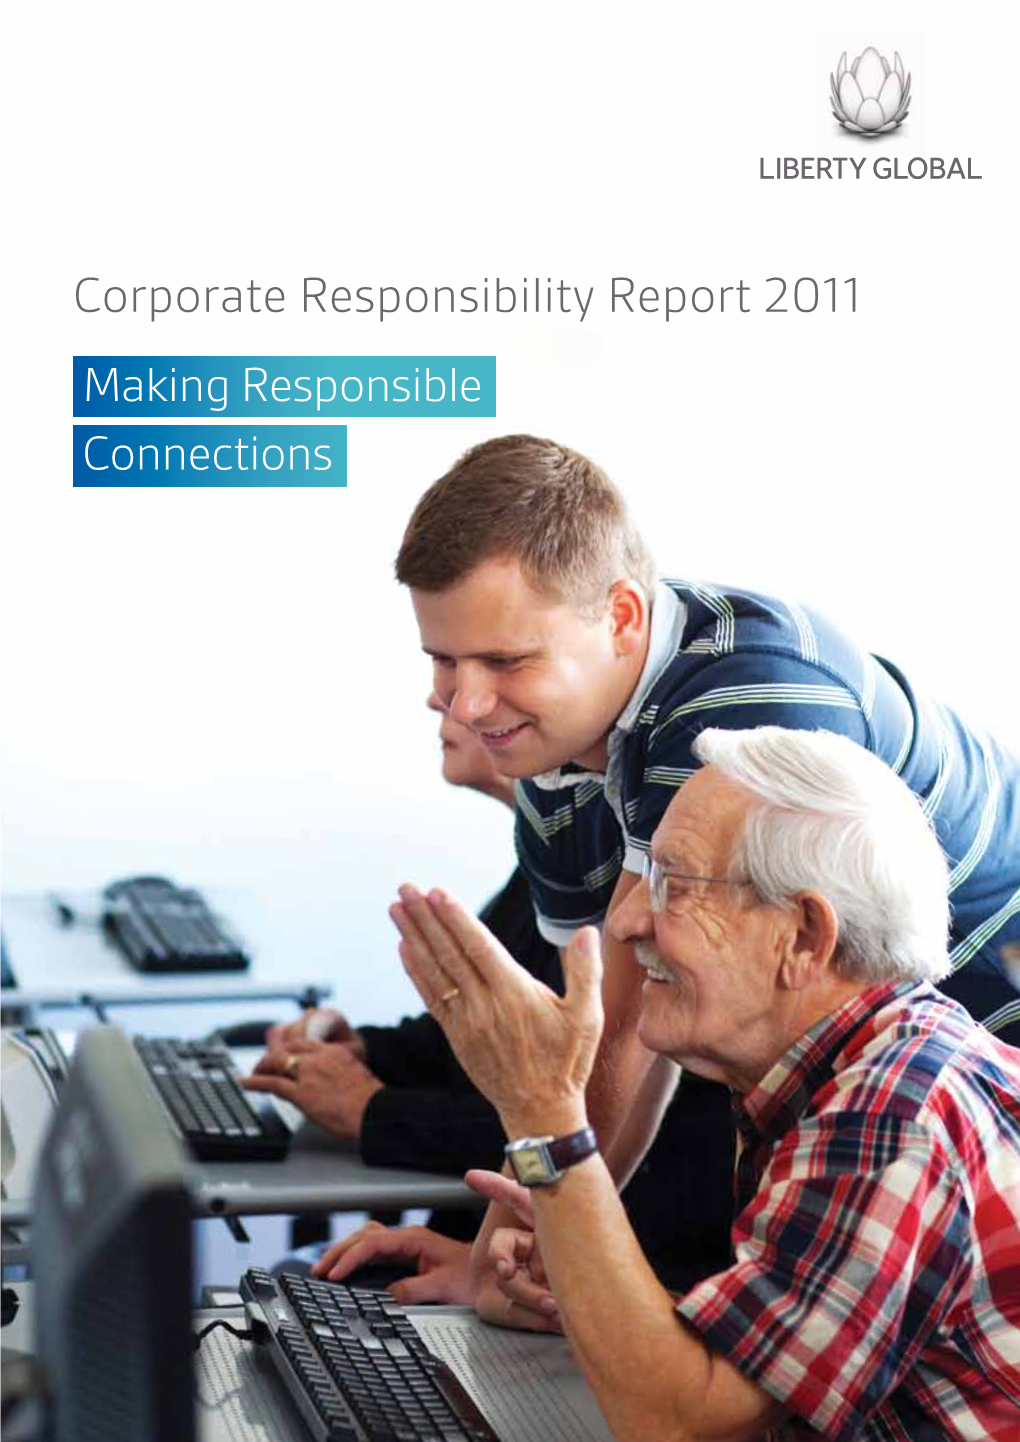 Liberty Global Corporate Responsibility Report 2011 a About This Report